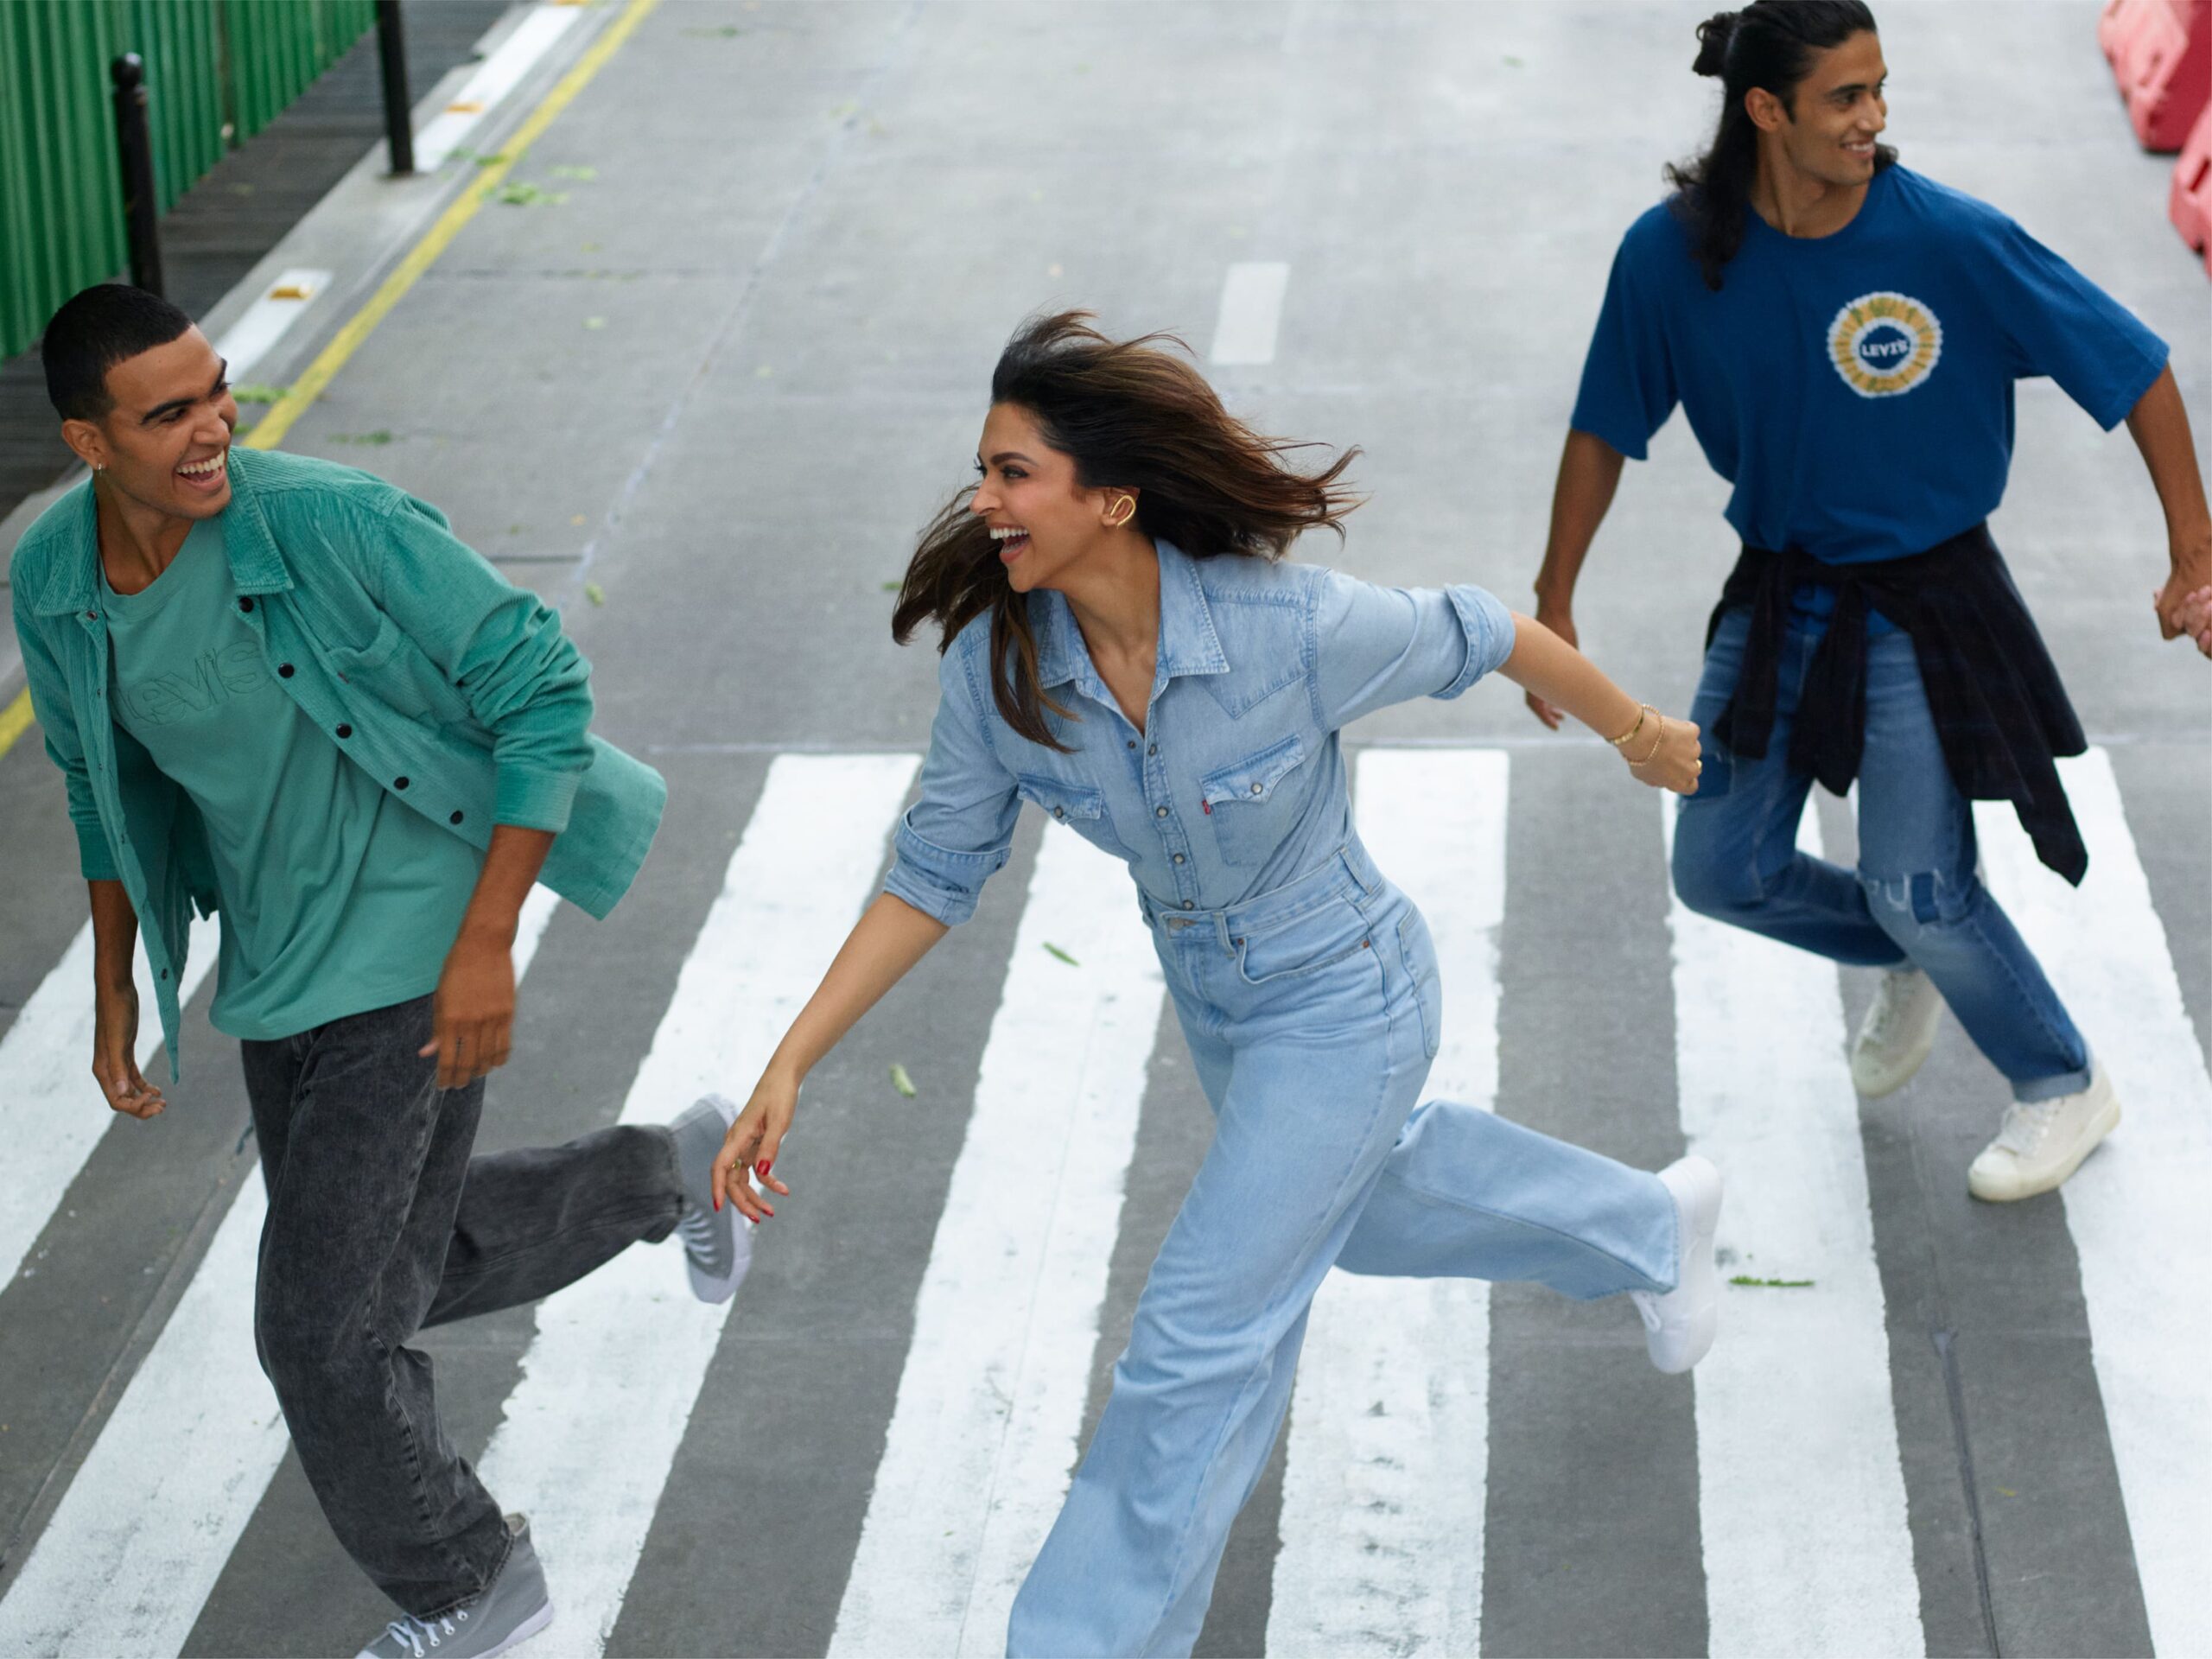 New Levi'sR Campaign For Now, For A Lifetime Celebrates Moments of Instincts featuring Deepika Padukone